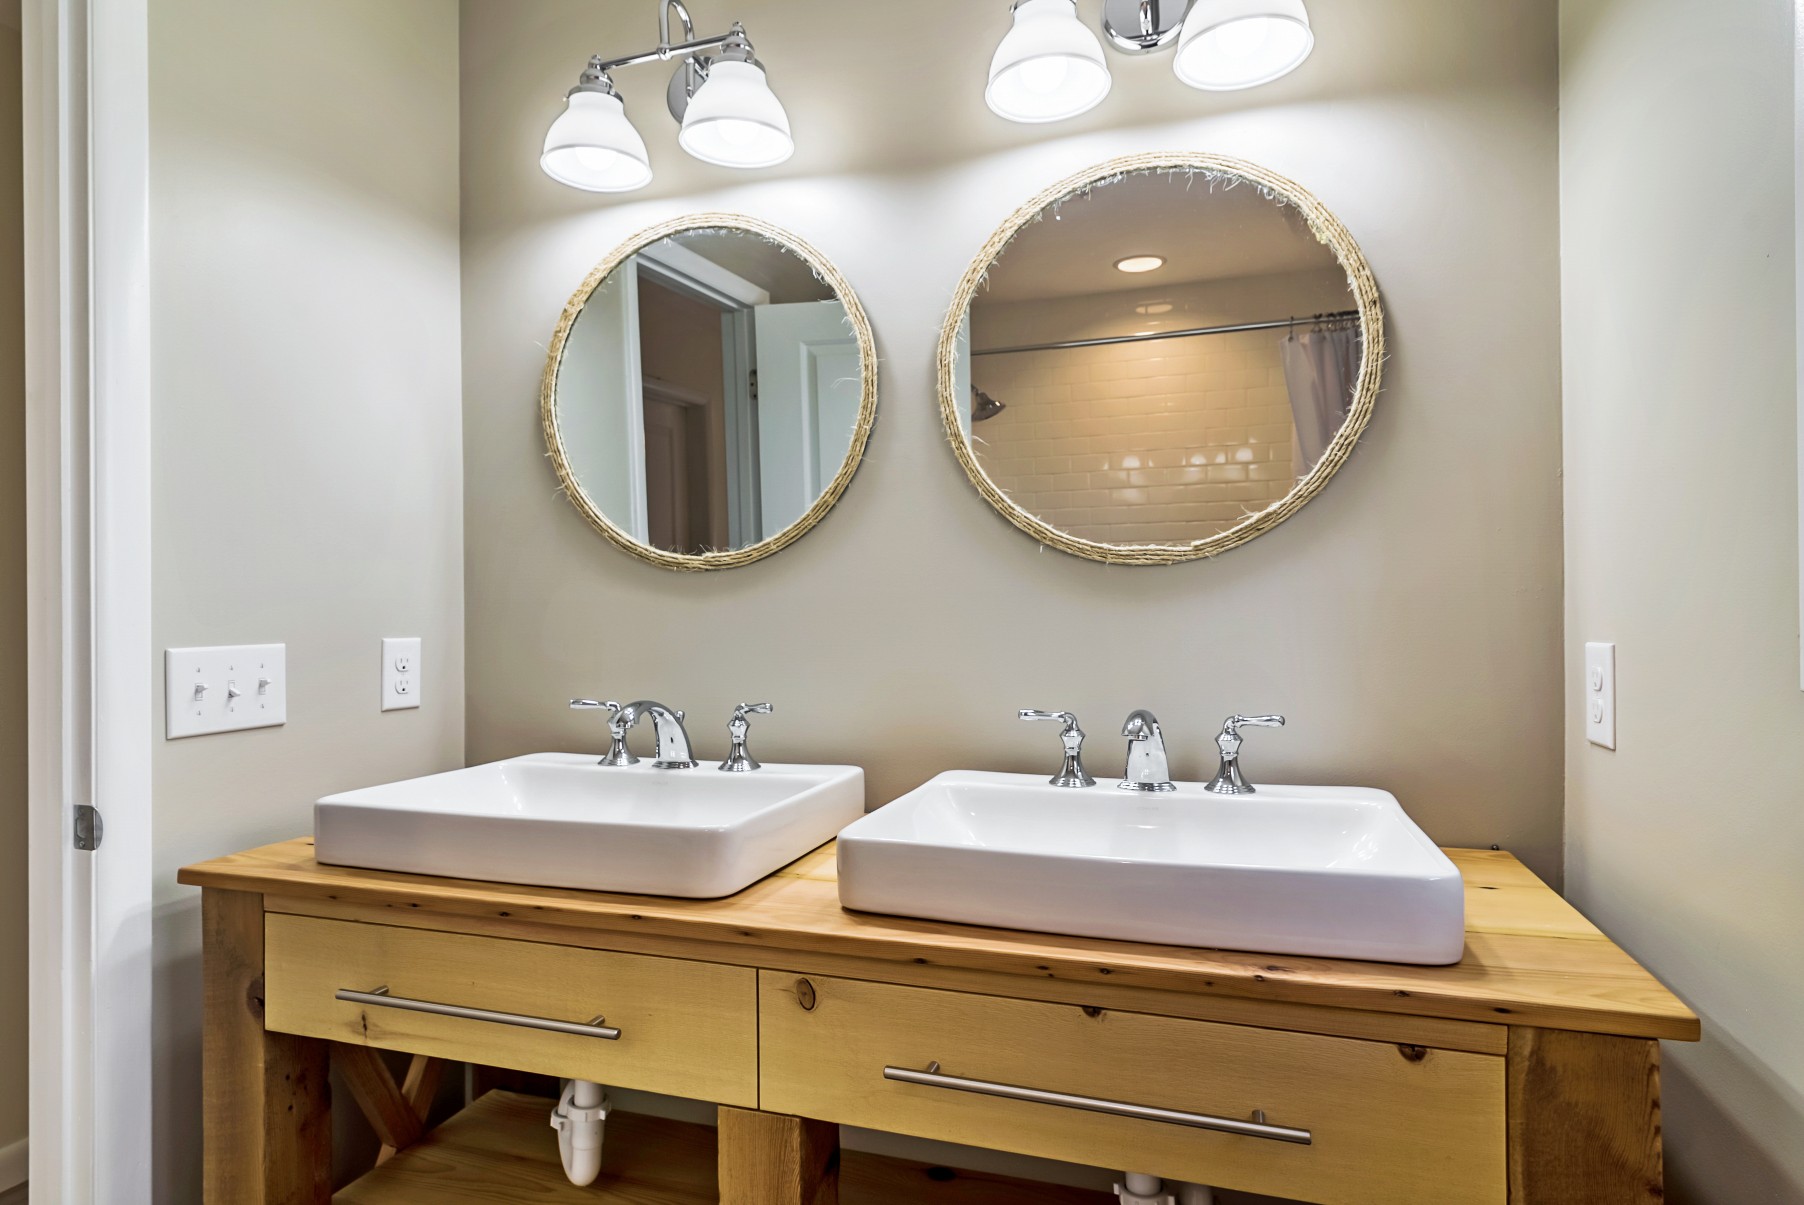 Bathroom Renovation in Wellington Parkway, Bethany Beach DE with Two Round Mirrors with Rope Outlining